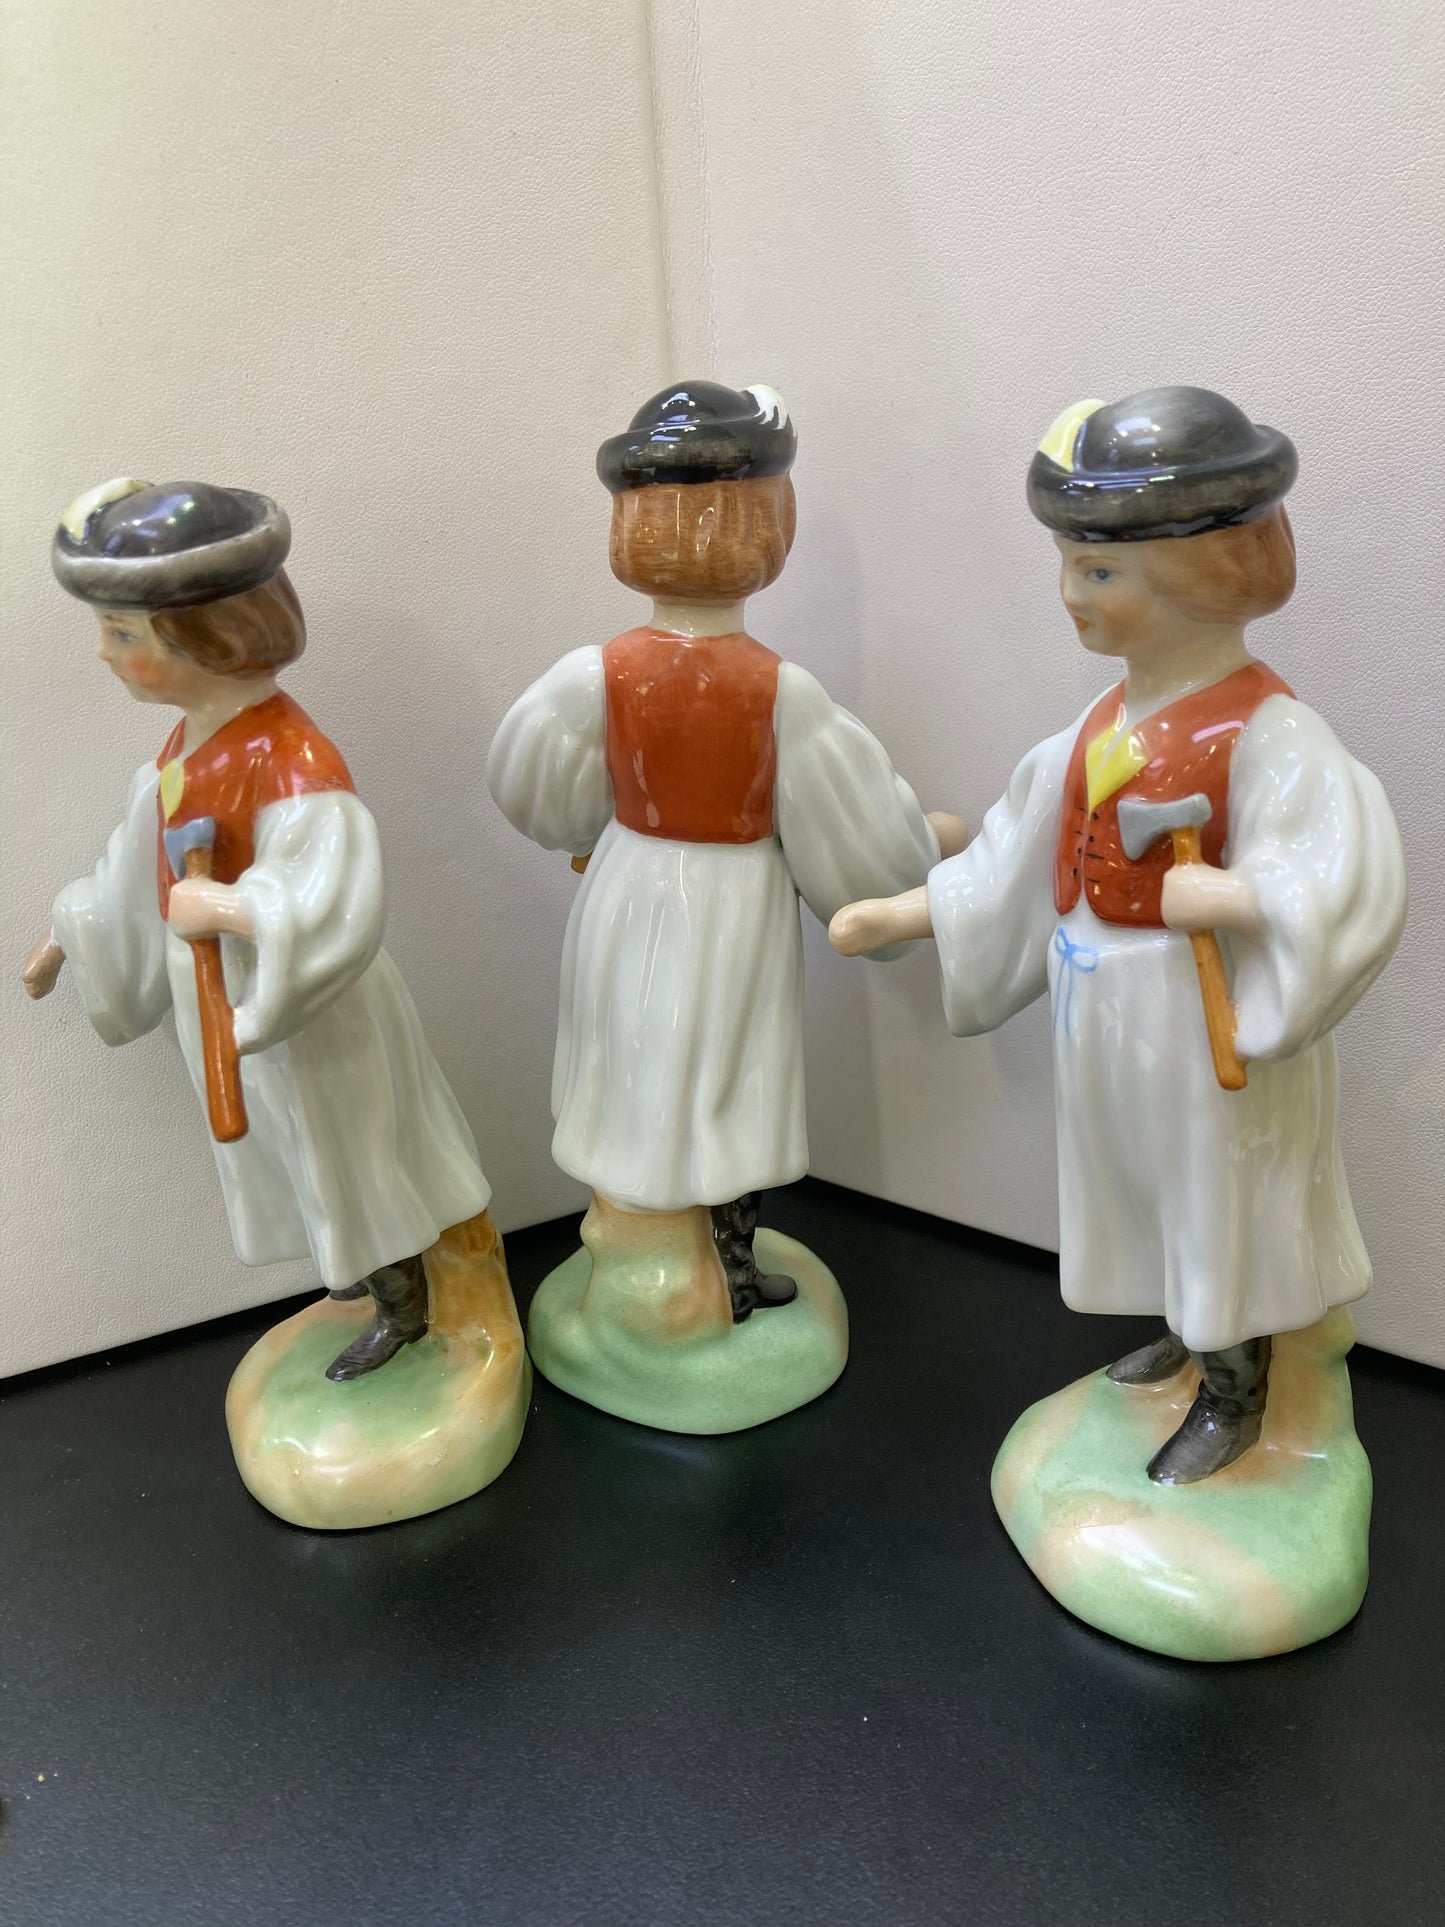 Herend porcelain figurines from Hungary, hand painted.